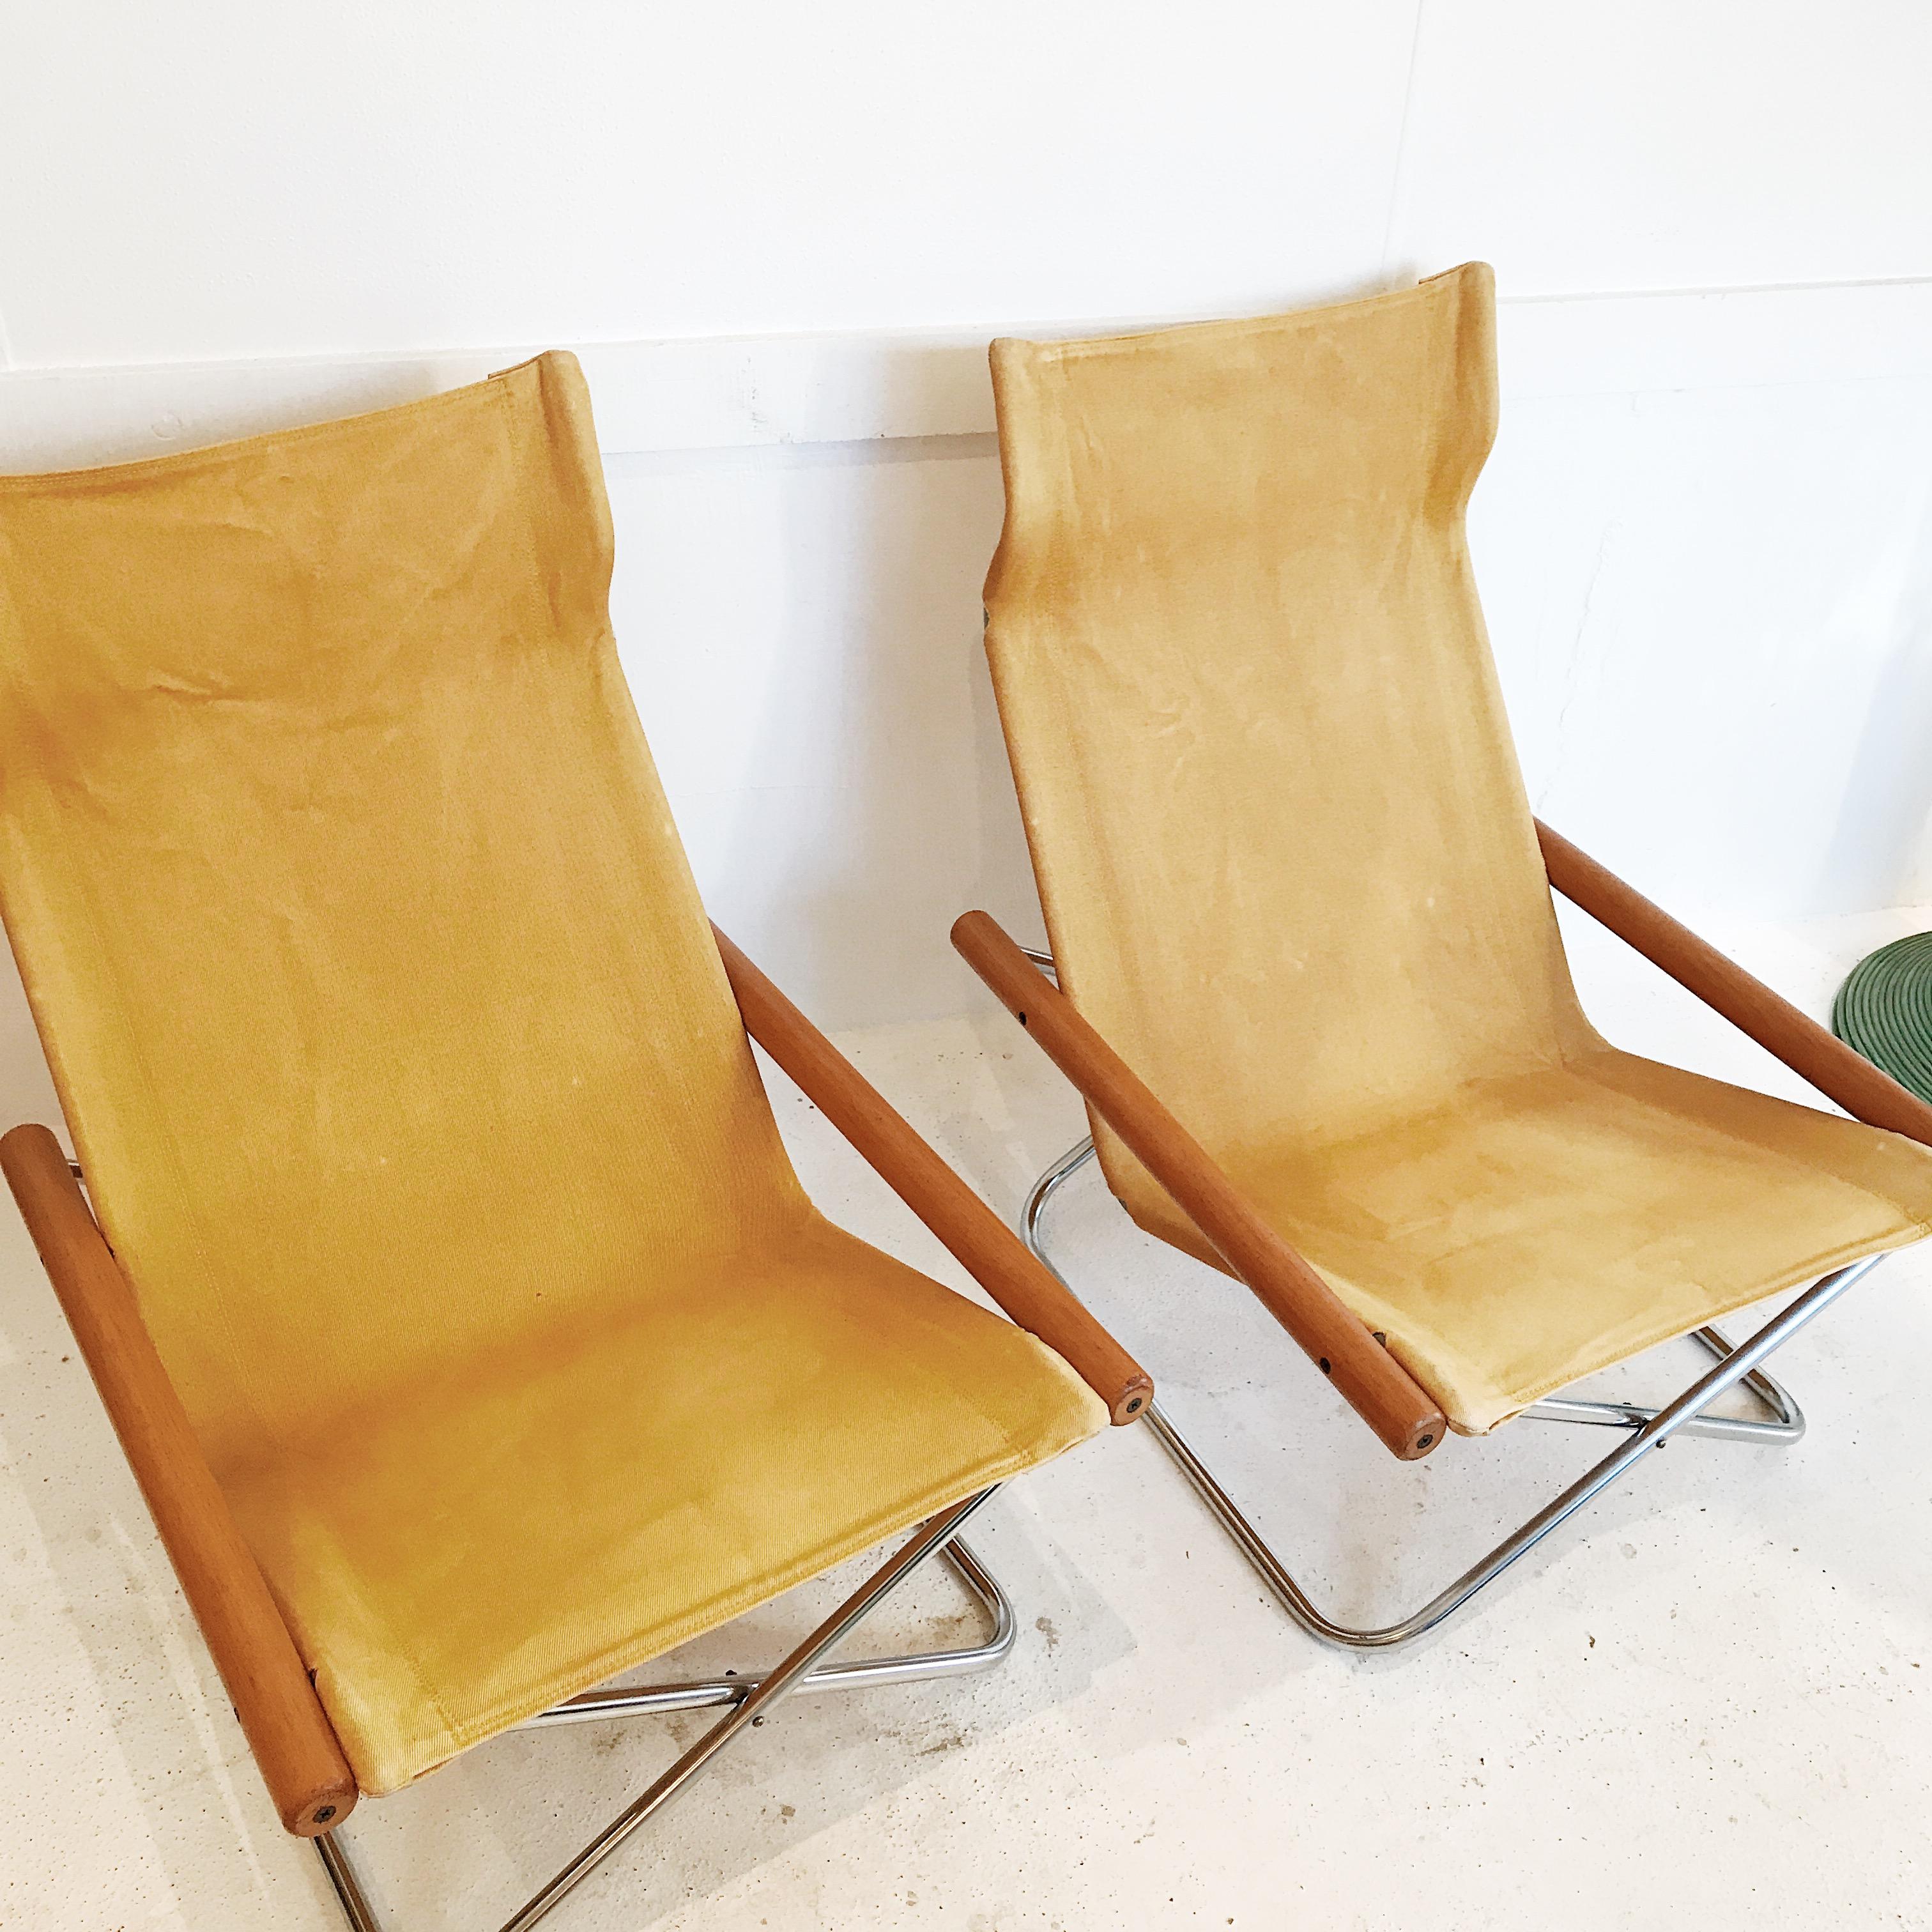 Turned Vintage All Original Pair of NY Chairs Designed by Takeshi Nii for Trend Pacific